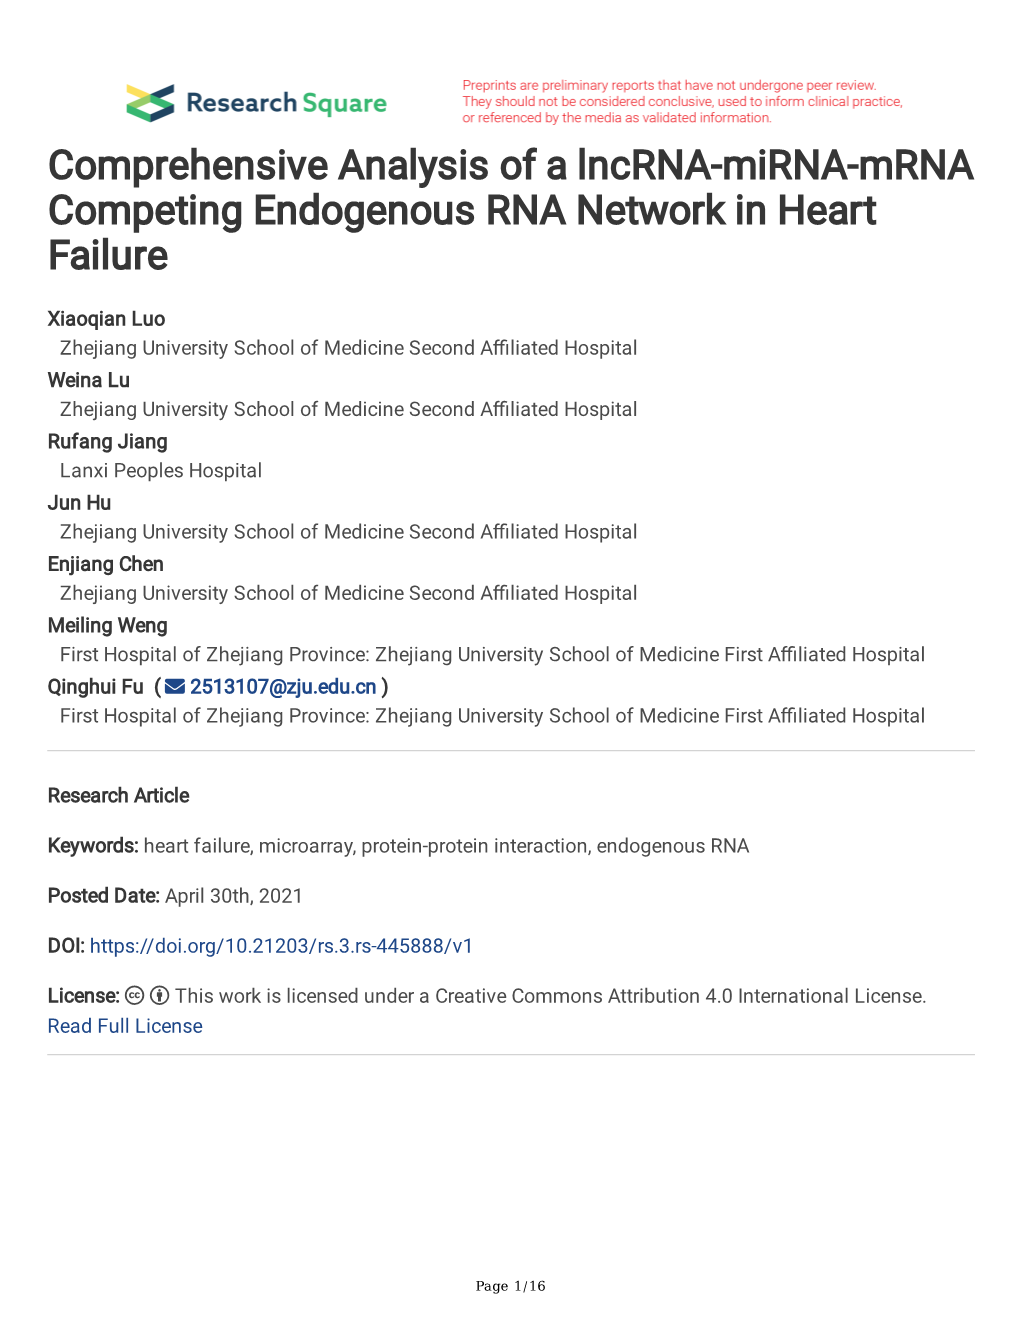 Comprehensive Analysis of a Lncrna-Mirna-Mrna Competing Endogenous RNA Network in Heart Failure